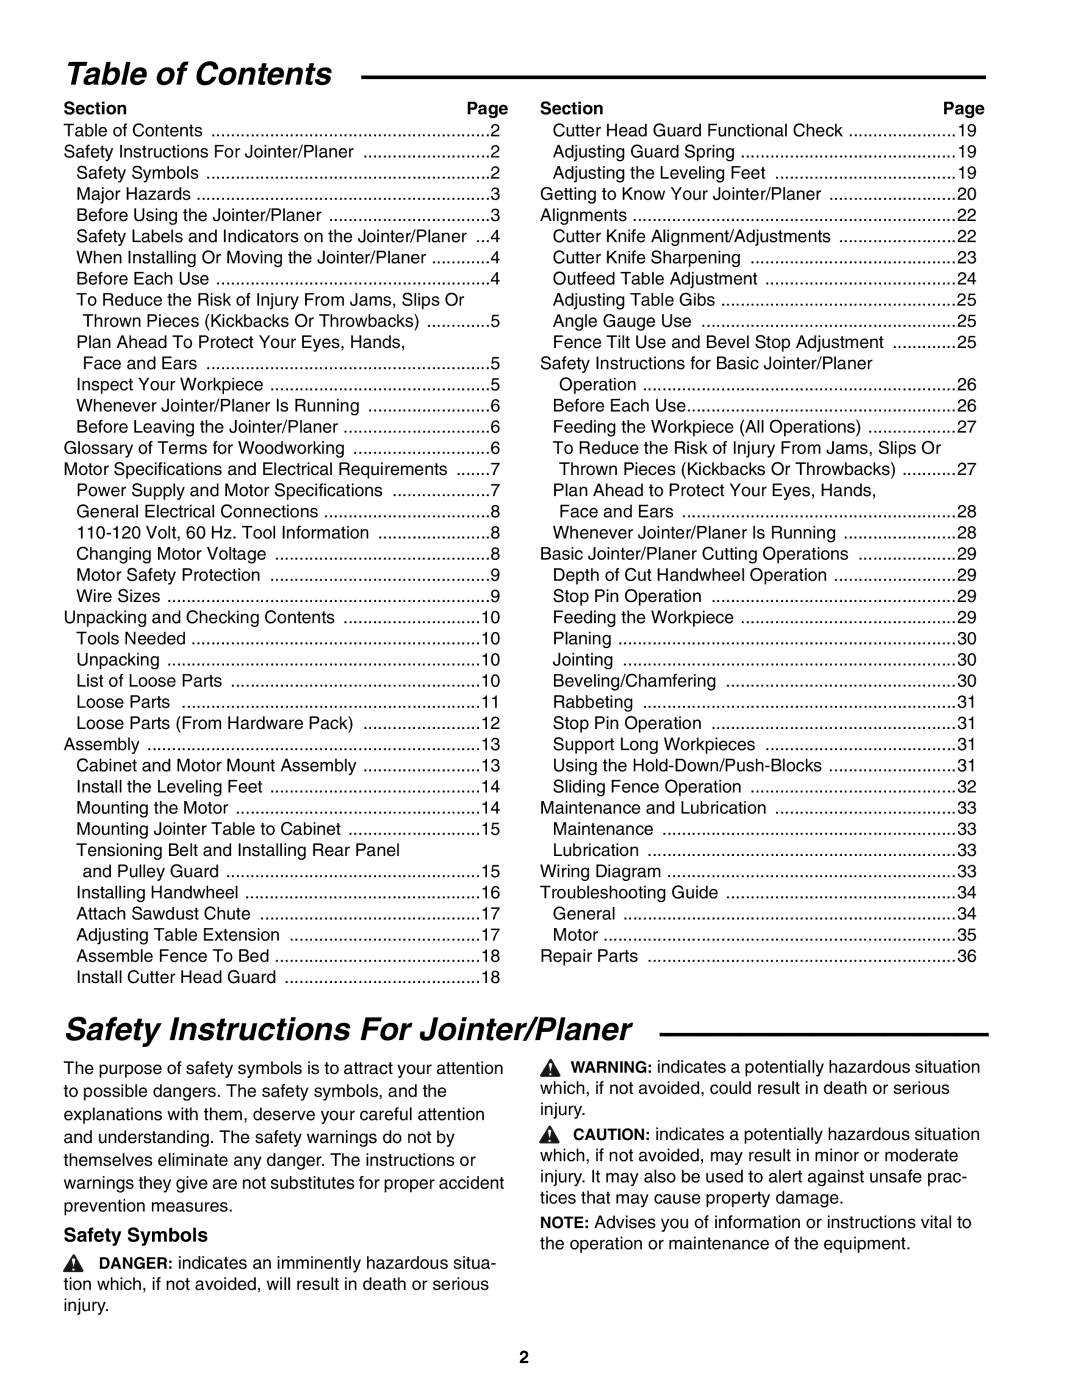 RIDGID JP06101 manual Table of Contents, Safety Instructions For Jointer/Planer 